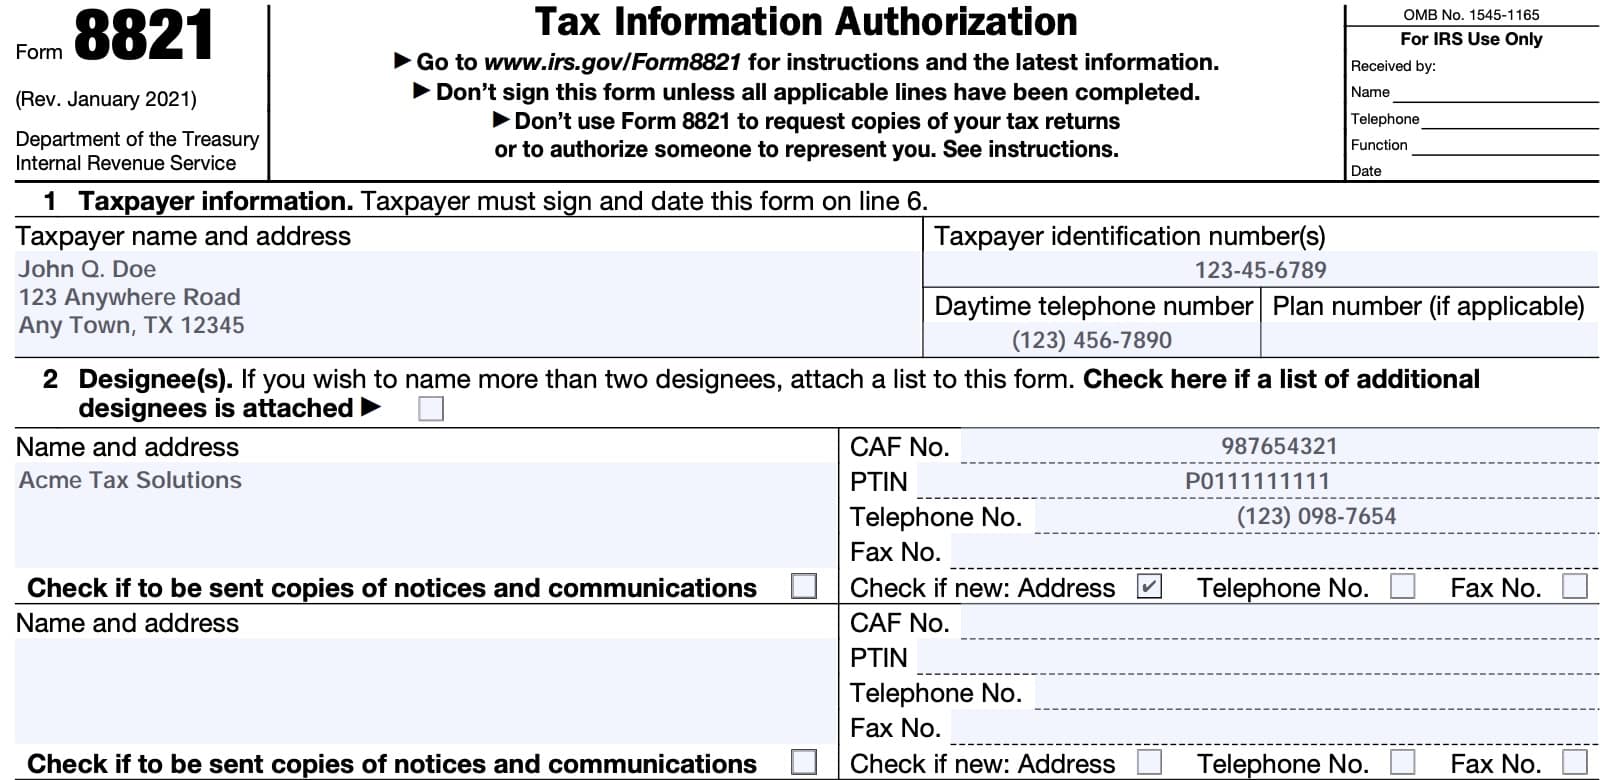 irs form 8821, tax information authorization, line 1: taxpayer information & line 2: designee(s)